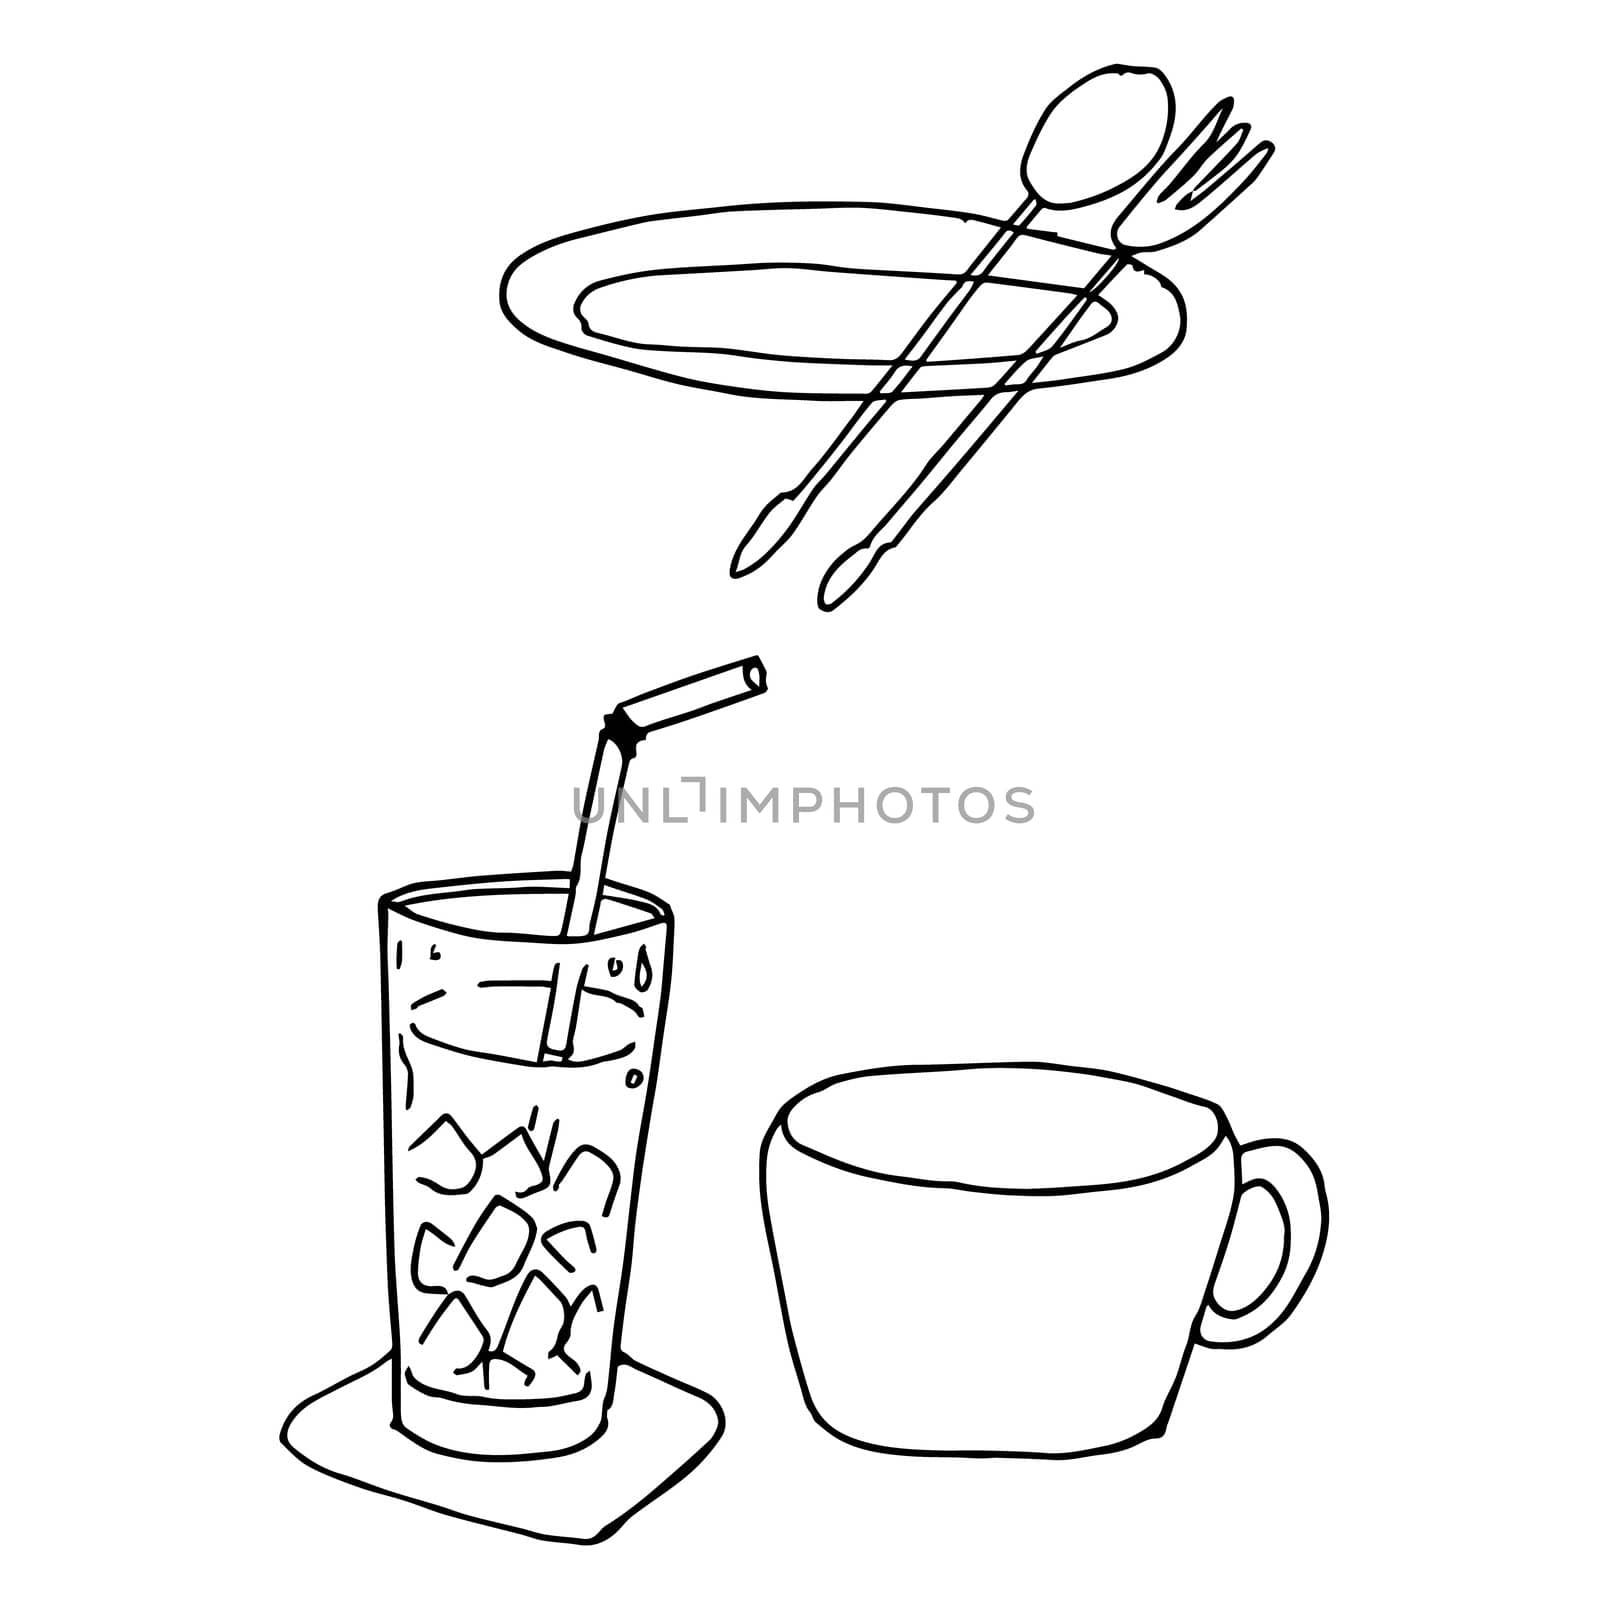 restaurant icon, set for food meal, doodle hand drawn by simpleBE